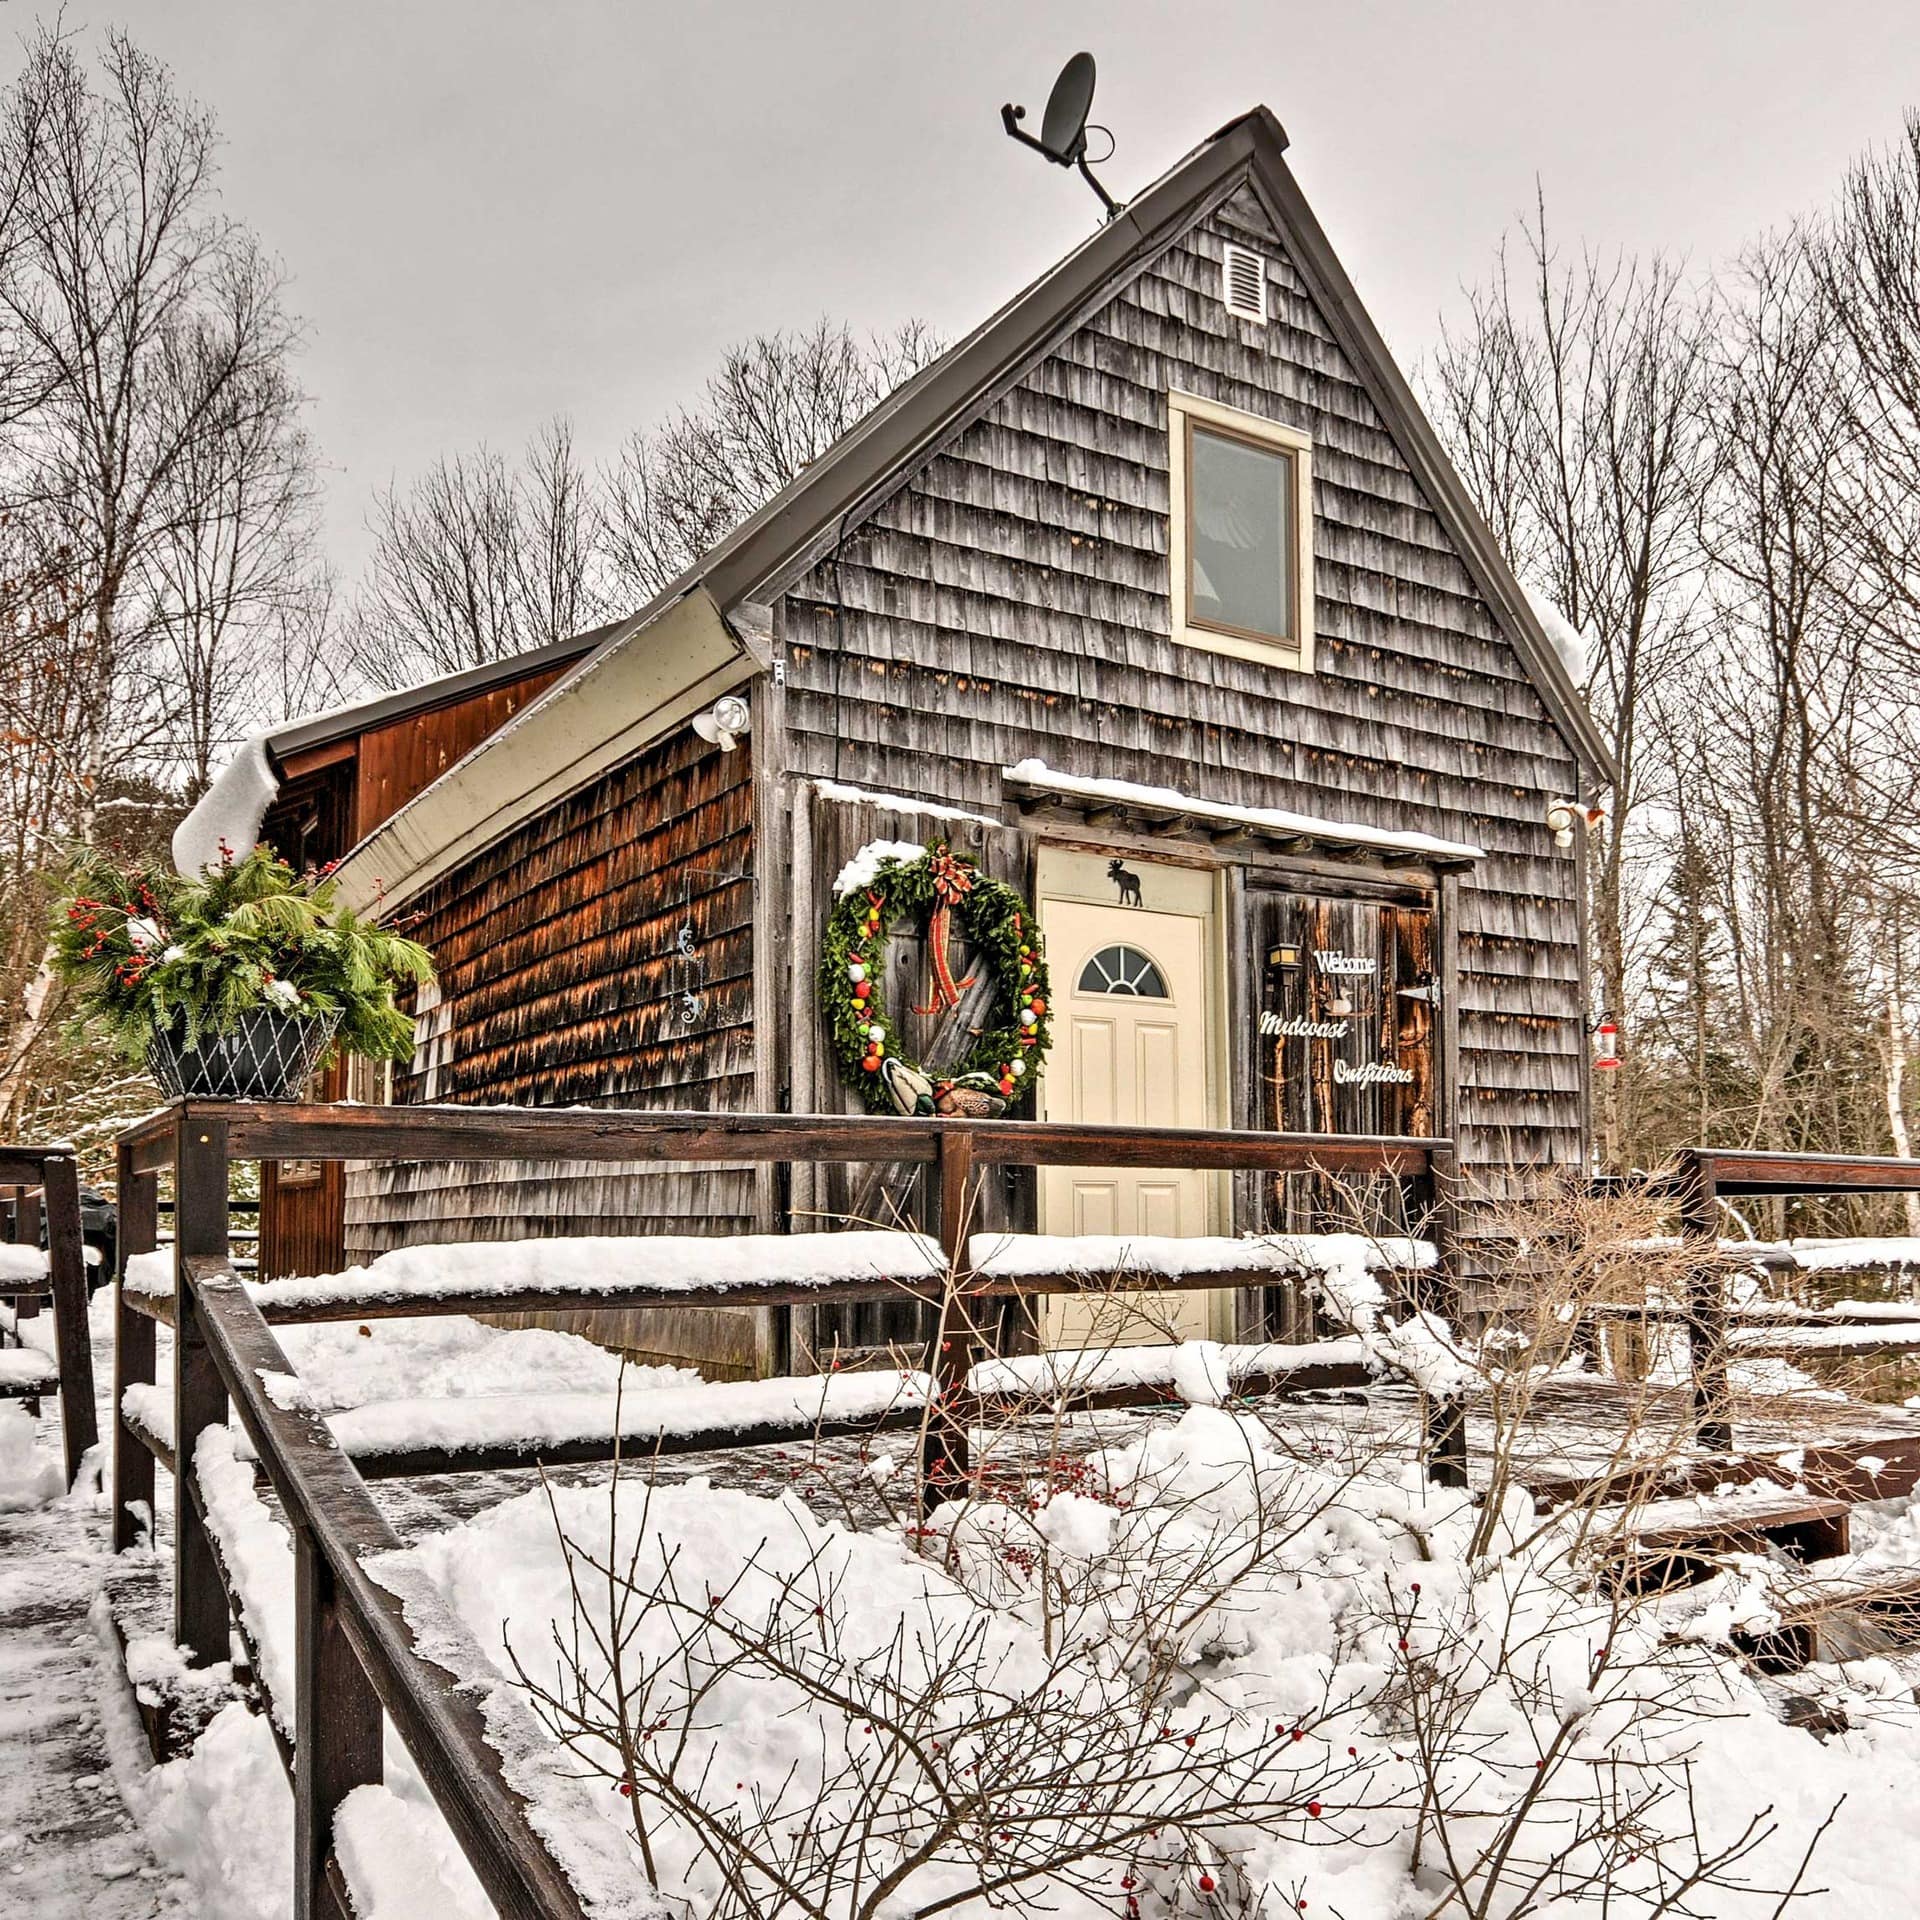 A winter cabin rental in Maine decorated for the holidays